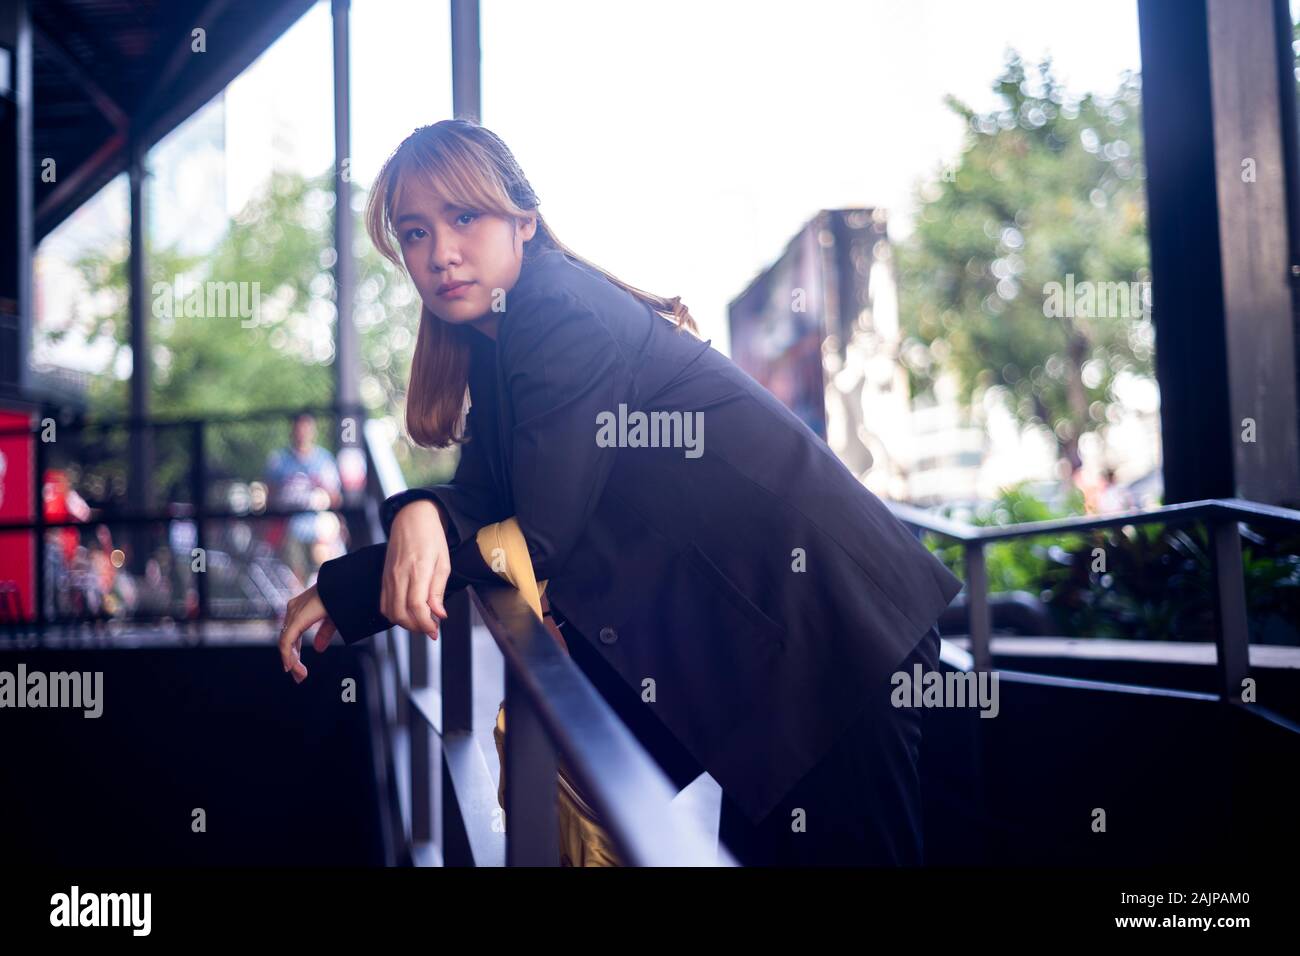 Blond hair woman with half-tied hair bend down herself on the handrail of the slope path in the shopping mall after work. Stock Photo